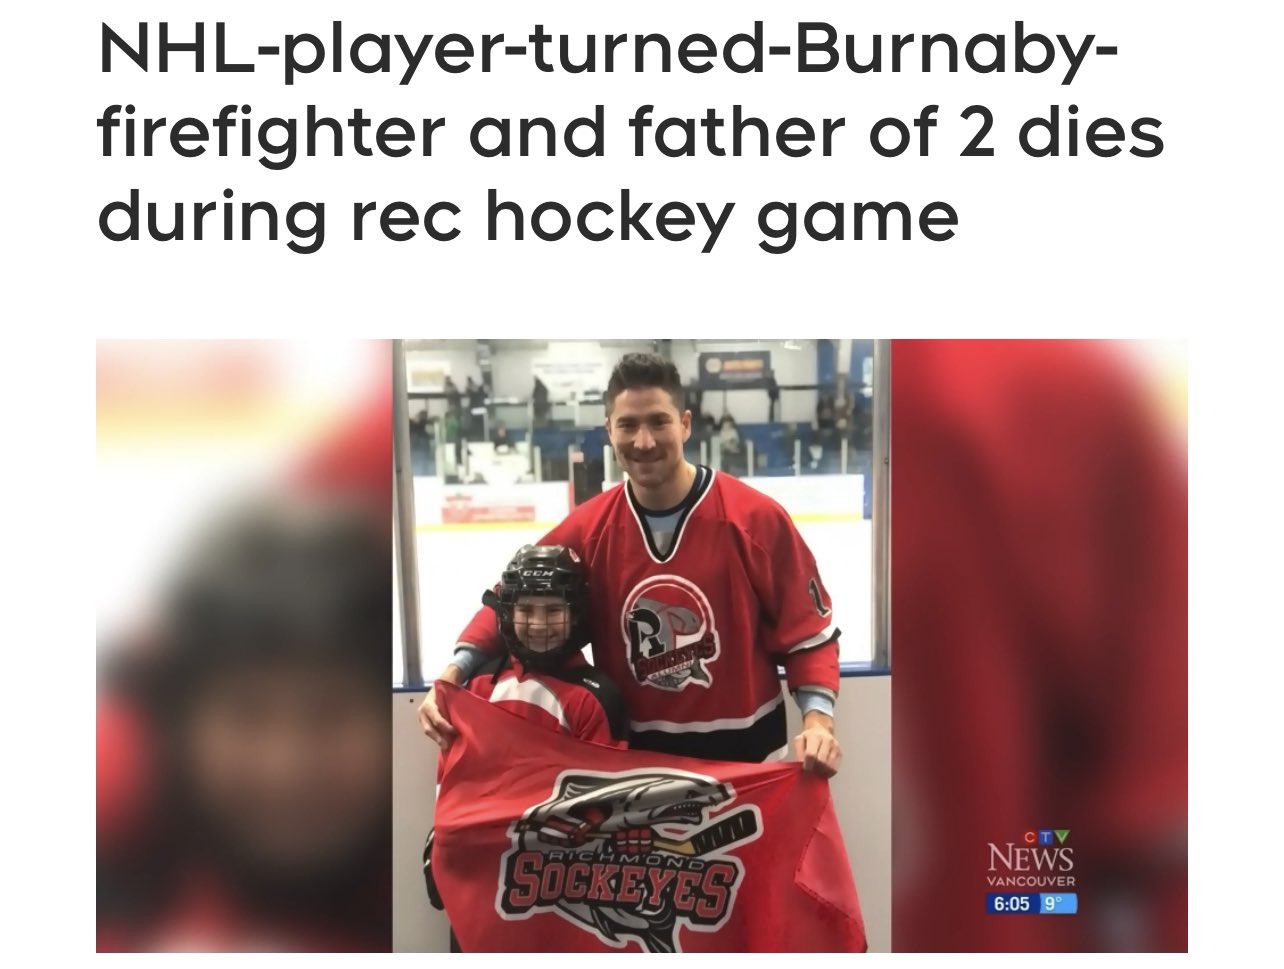 A former professional hockey player Died Suddenly of a heart attack while playing rec hockey.